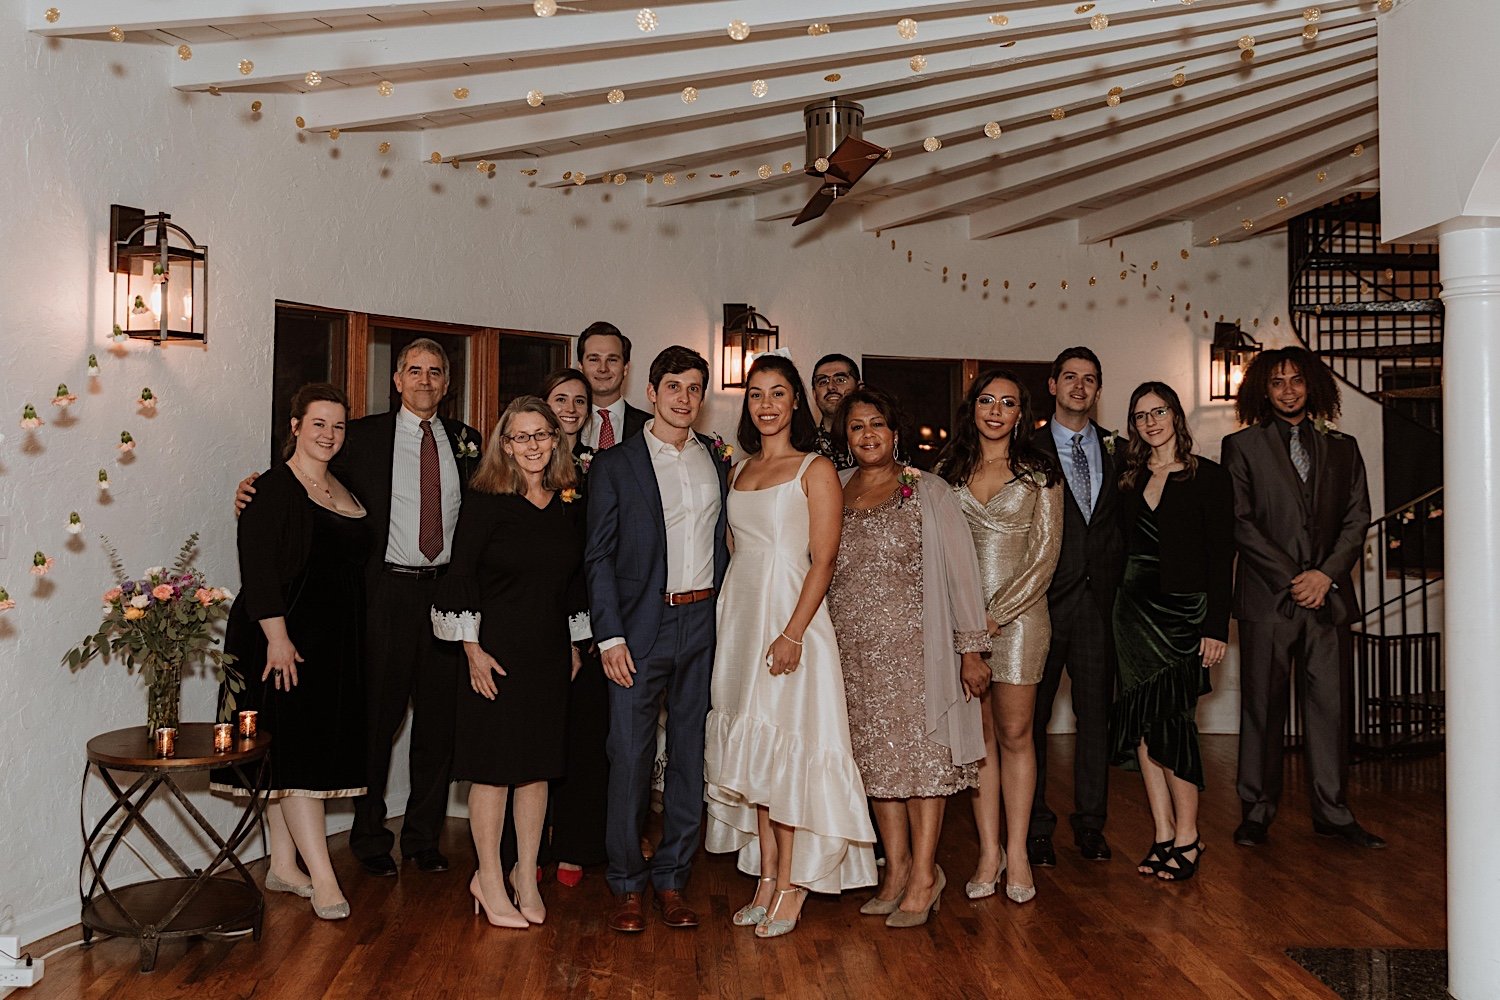 Newly weds pose with guests of their intimate Indiana wedding